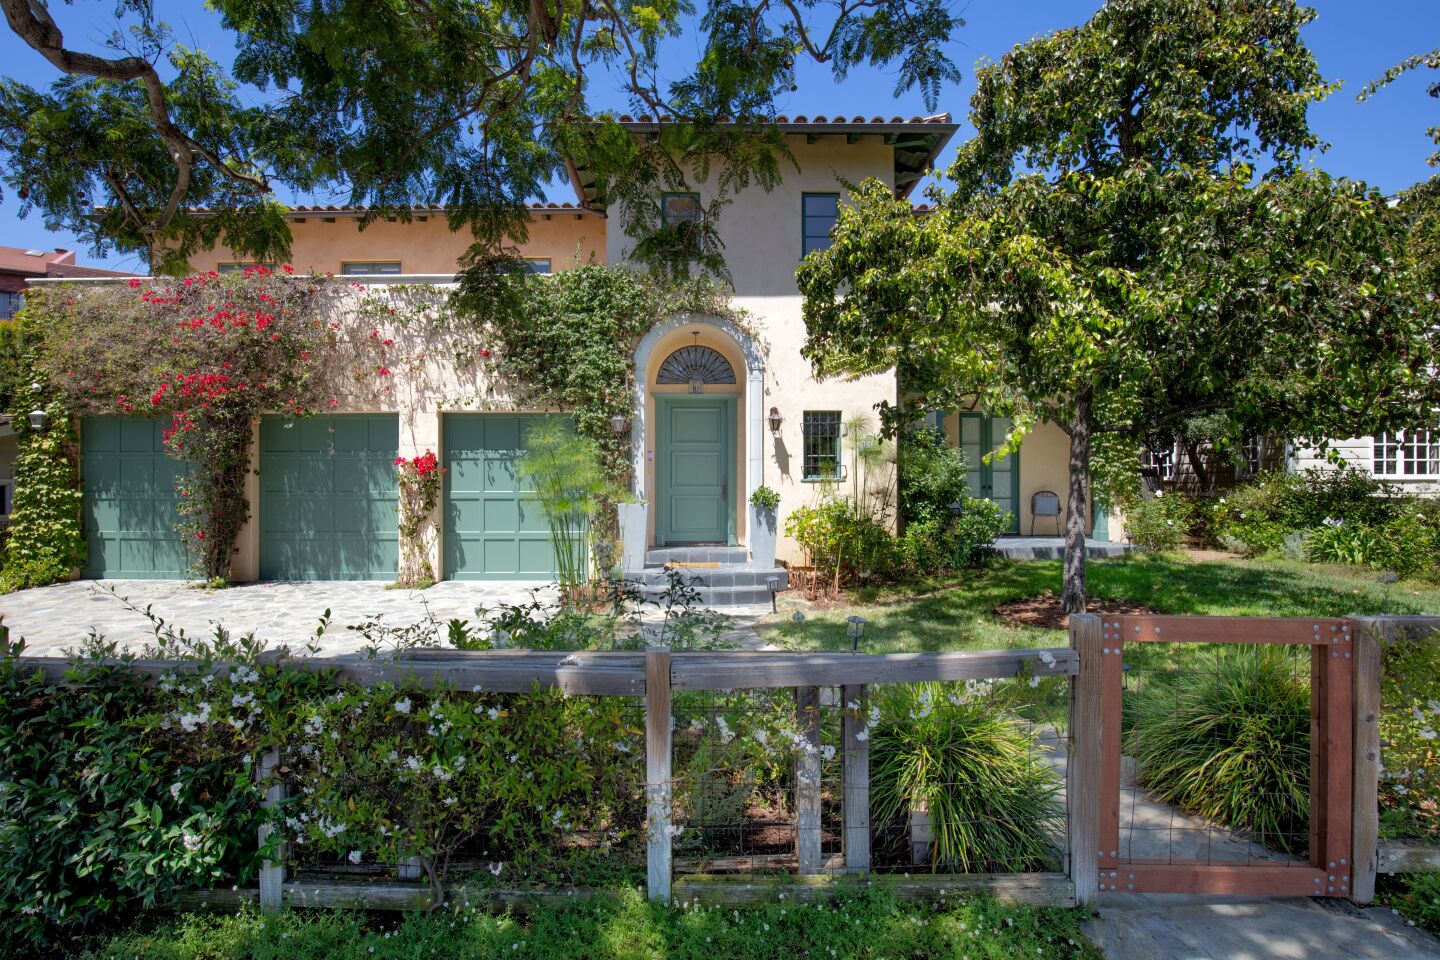 Geena Davis' Pacific Palisades house: the front